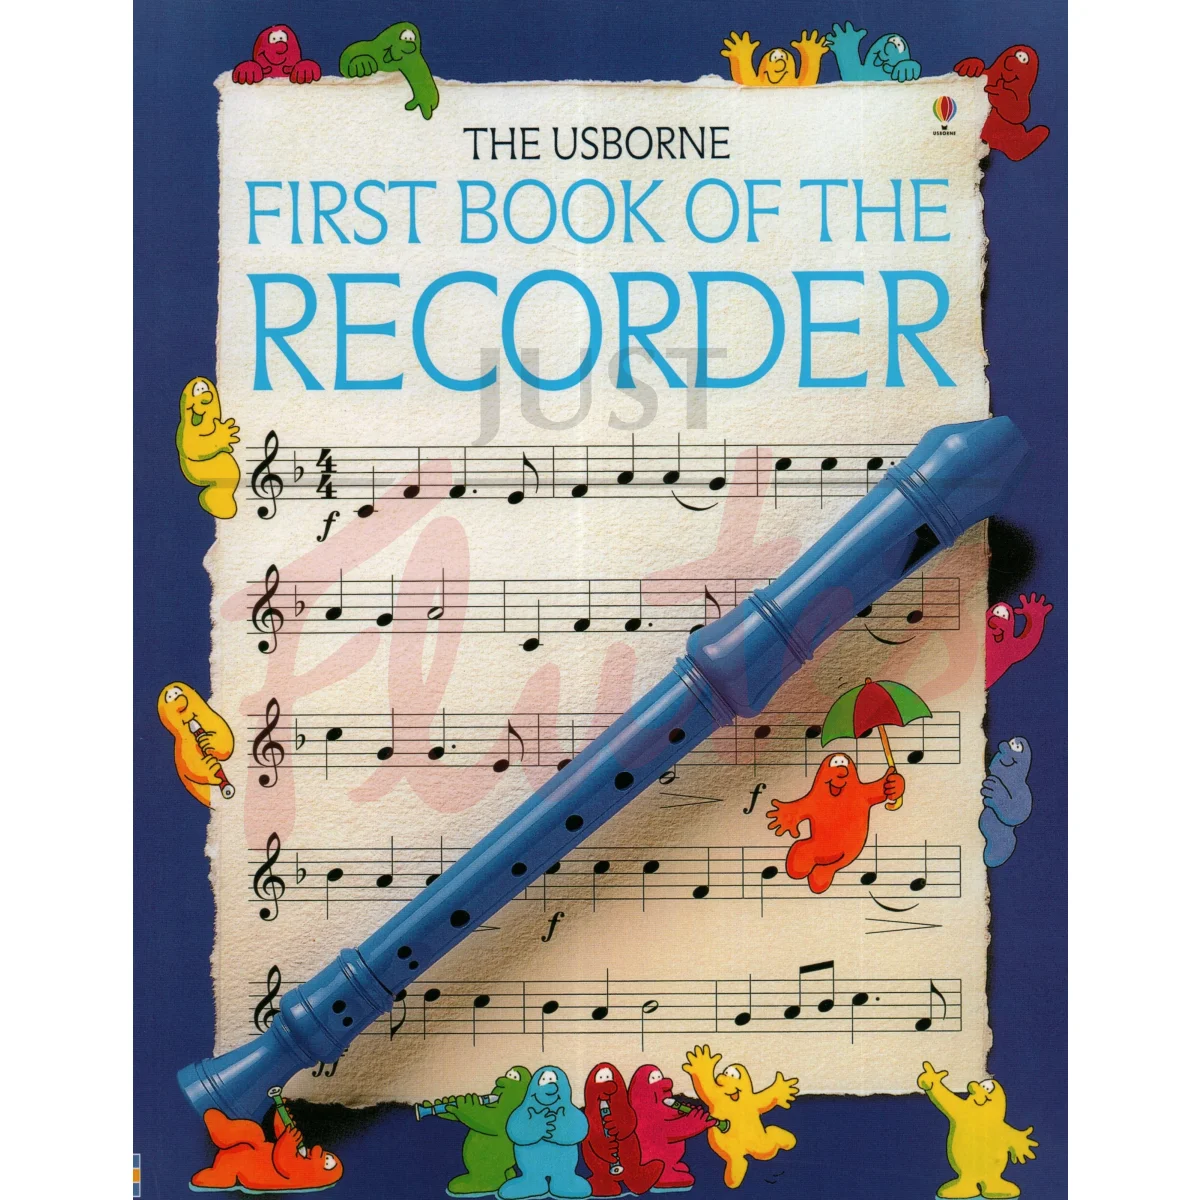 The Usborne First Book of the Recorder